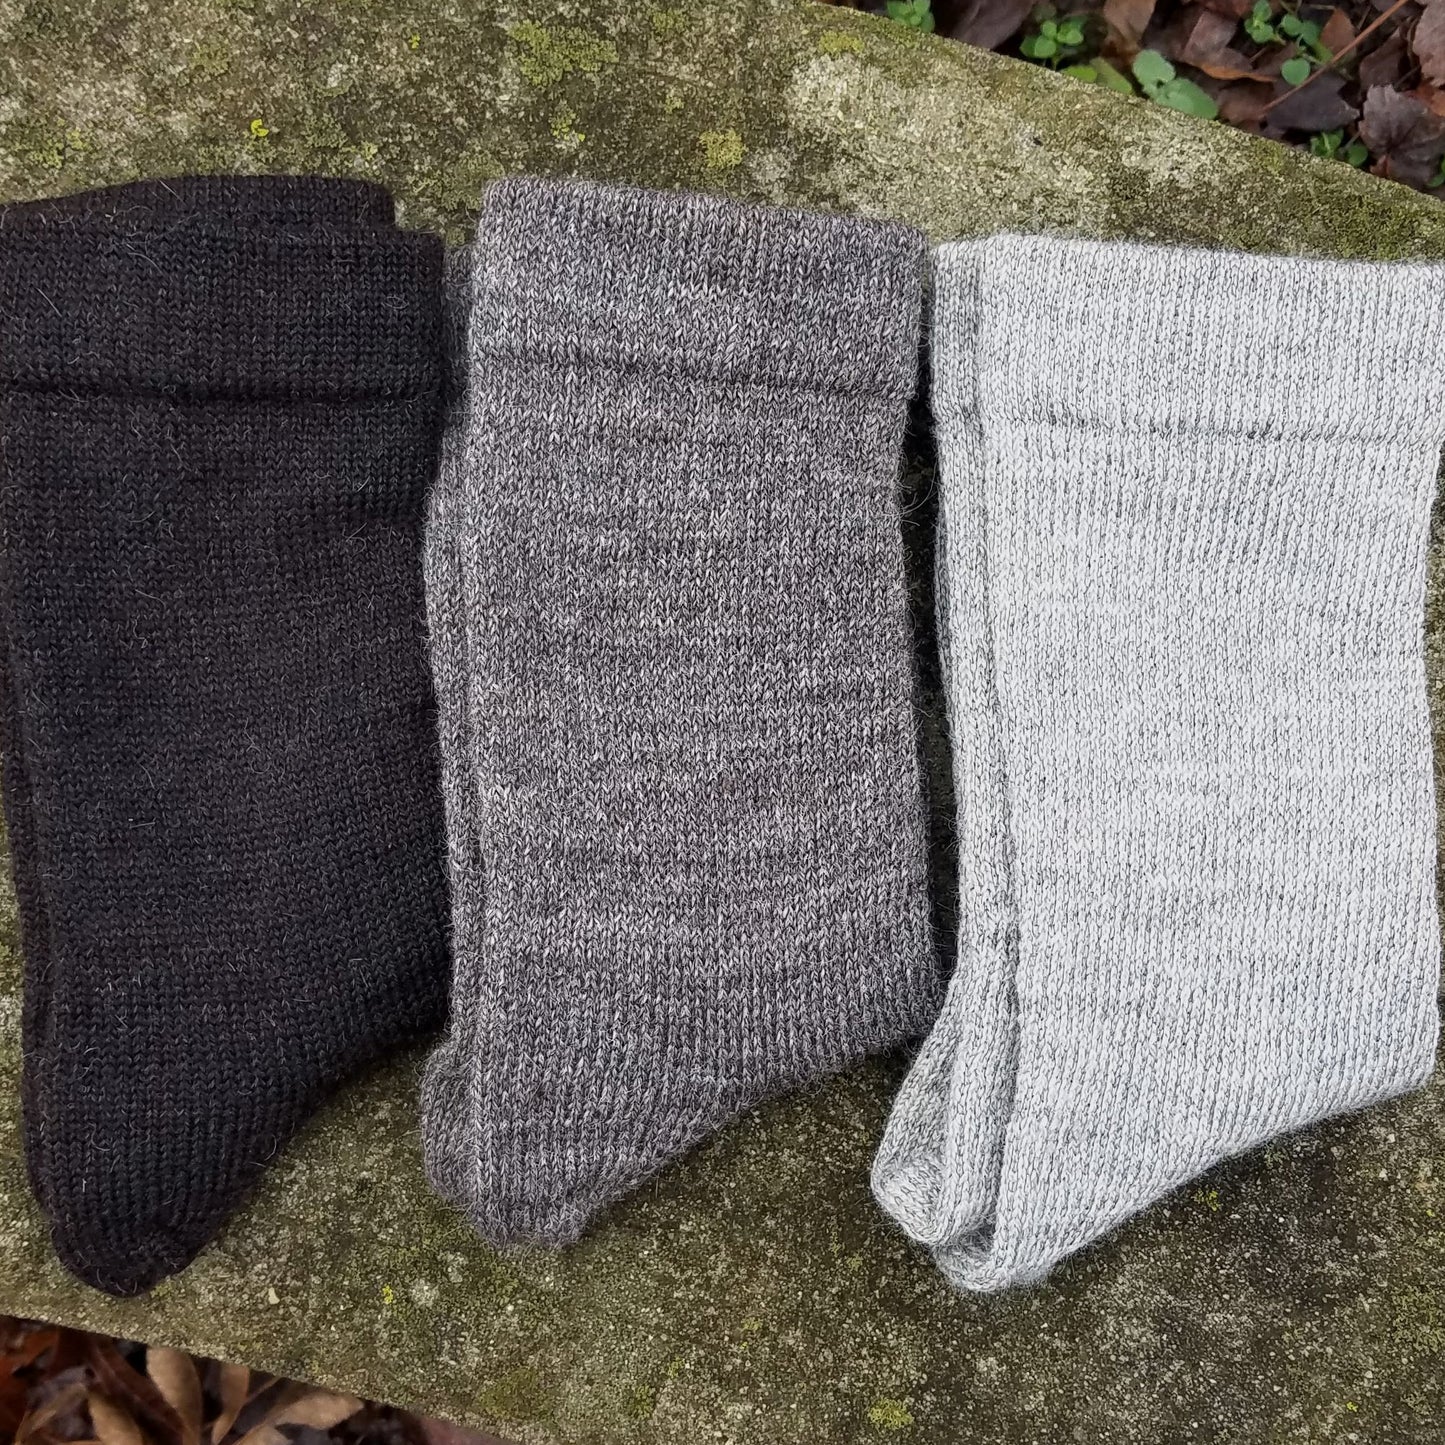 United States, Kathleen Oliver / Sweet Tree Hill Farm, Shepherd’s Socks: The Shadow Trio Collection